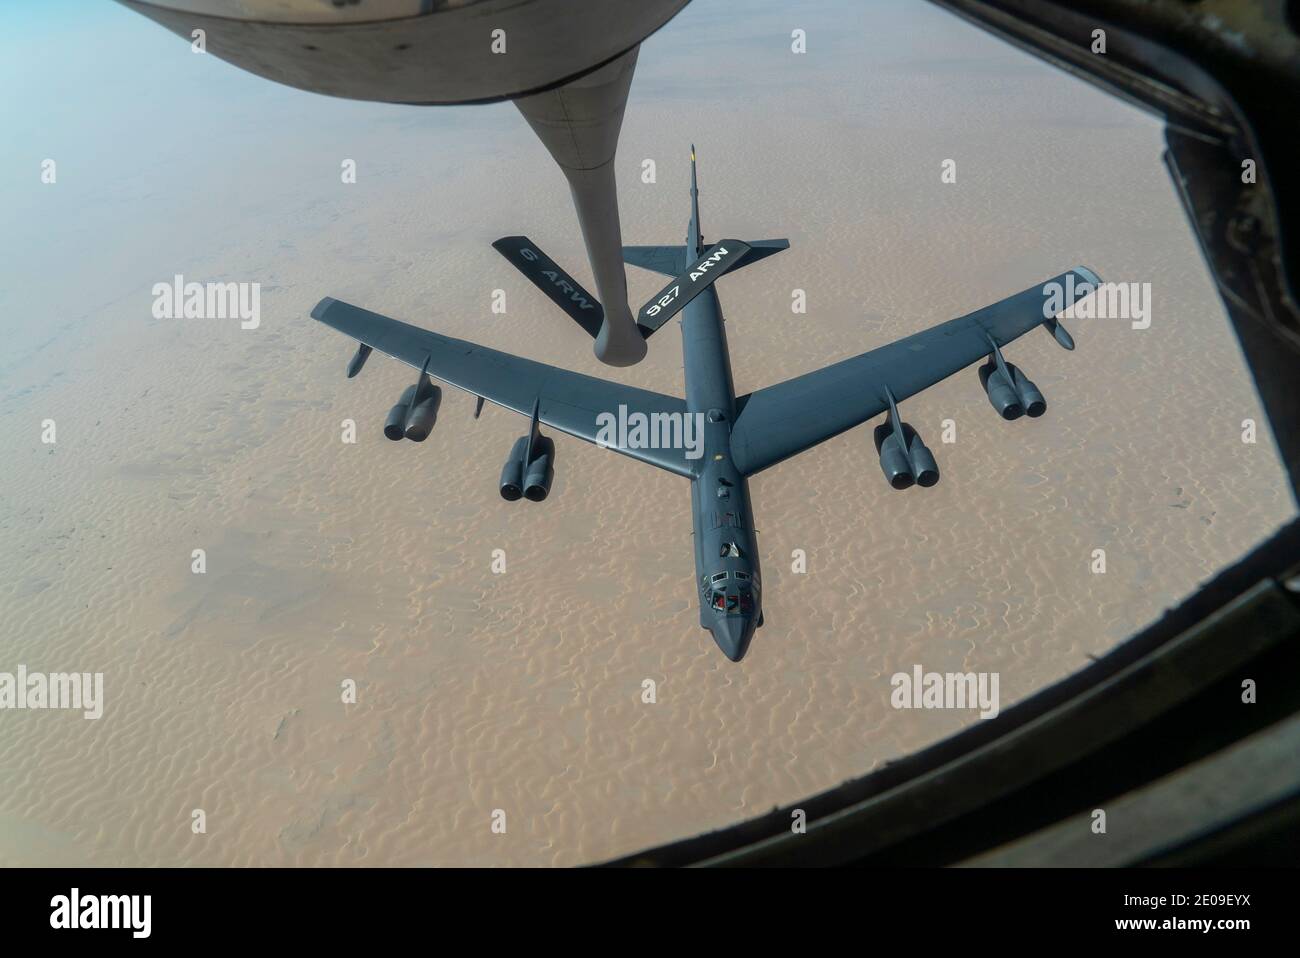 Persian Gulf, United States. 30th Dec, 2020. A U.S. Air Force B-52 Stratofortress strategic bomber aircraft from the 5th Bomb Wing, approaches a KC-135 Stratotanker for refueling December 30, 2020 over the Persian Gulf. The bomber is the third such show of force mission as a message to Iran. Credit: Planetpix/Alamy Live News Stock Photo